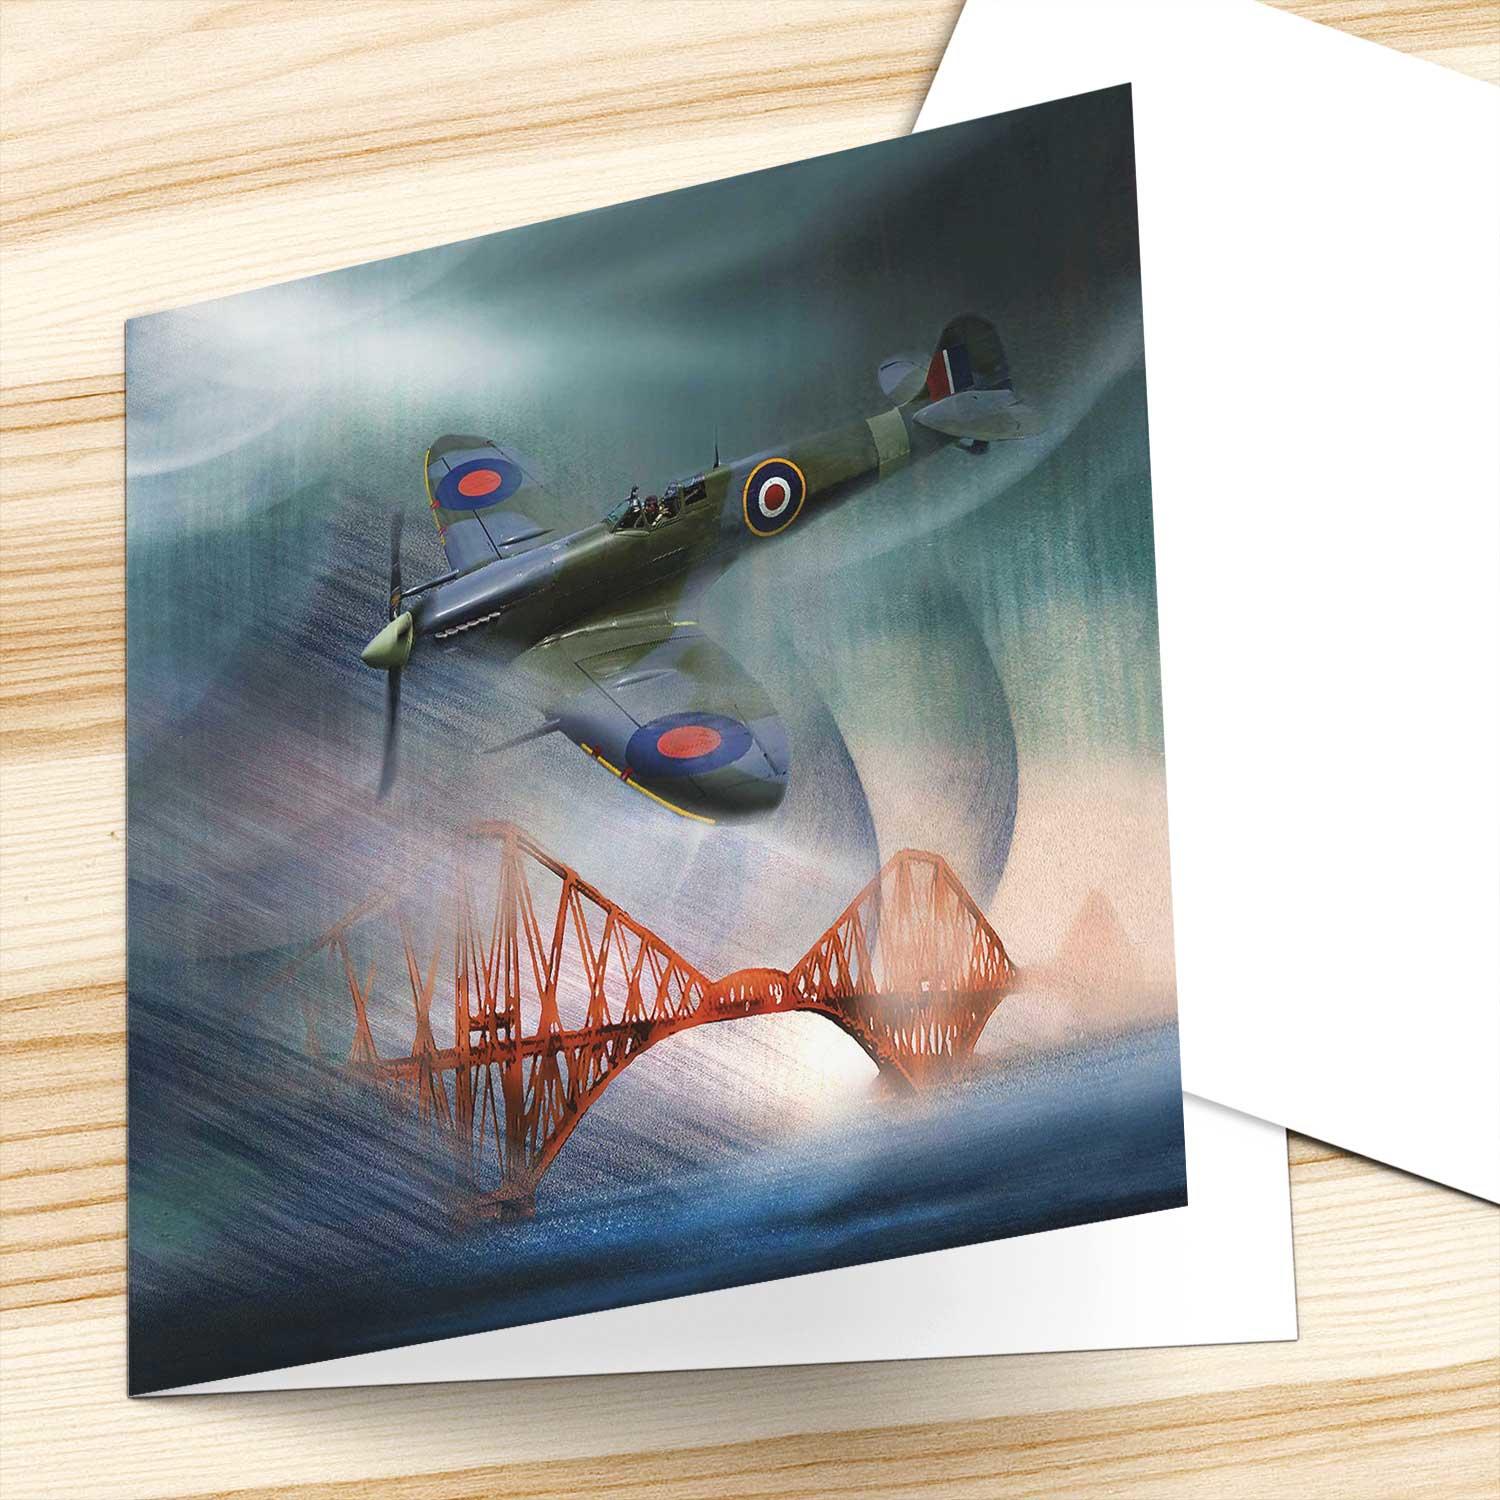 Spitfire Over Forth Bridge, Fife Greeting Card from an original painting by artist Esther Cohen